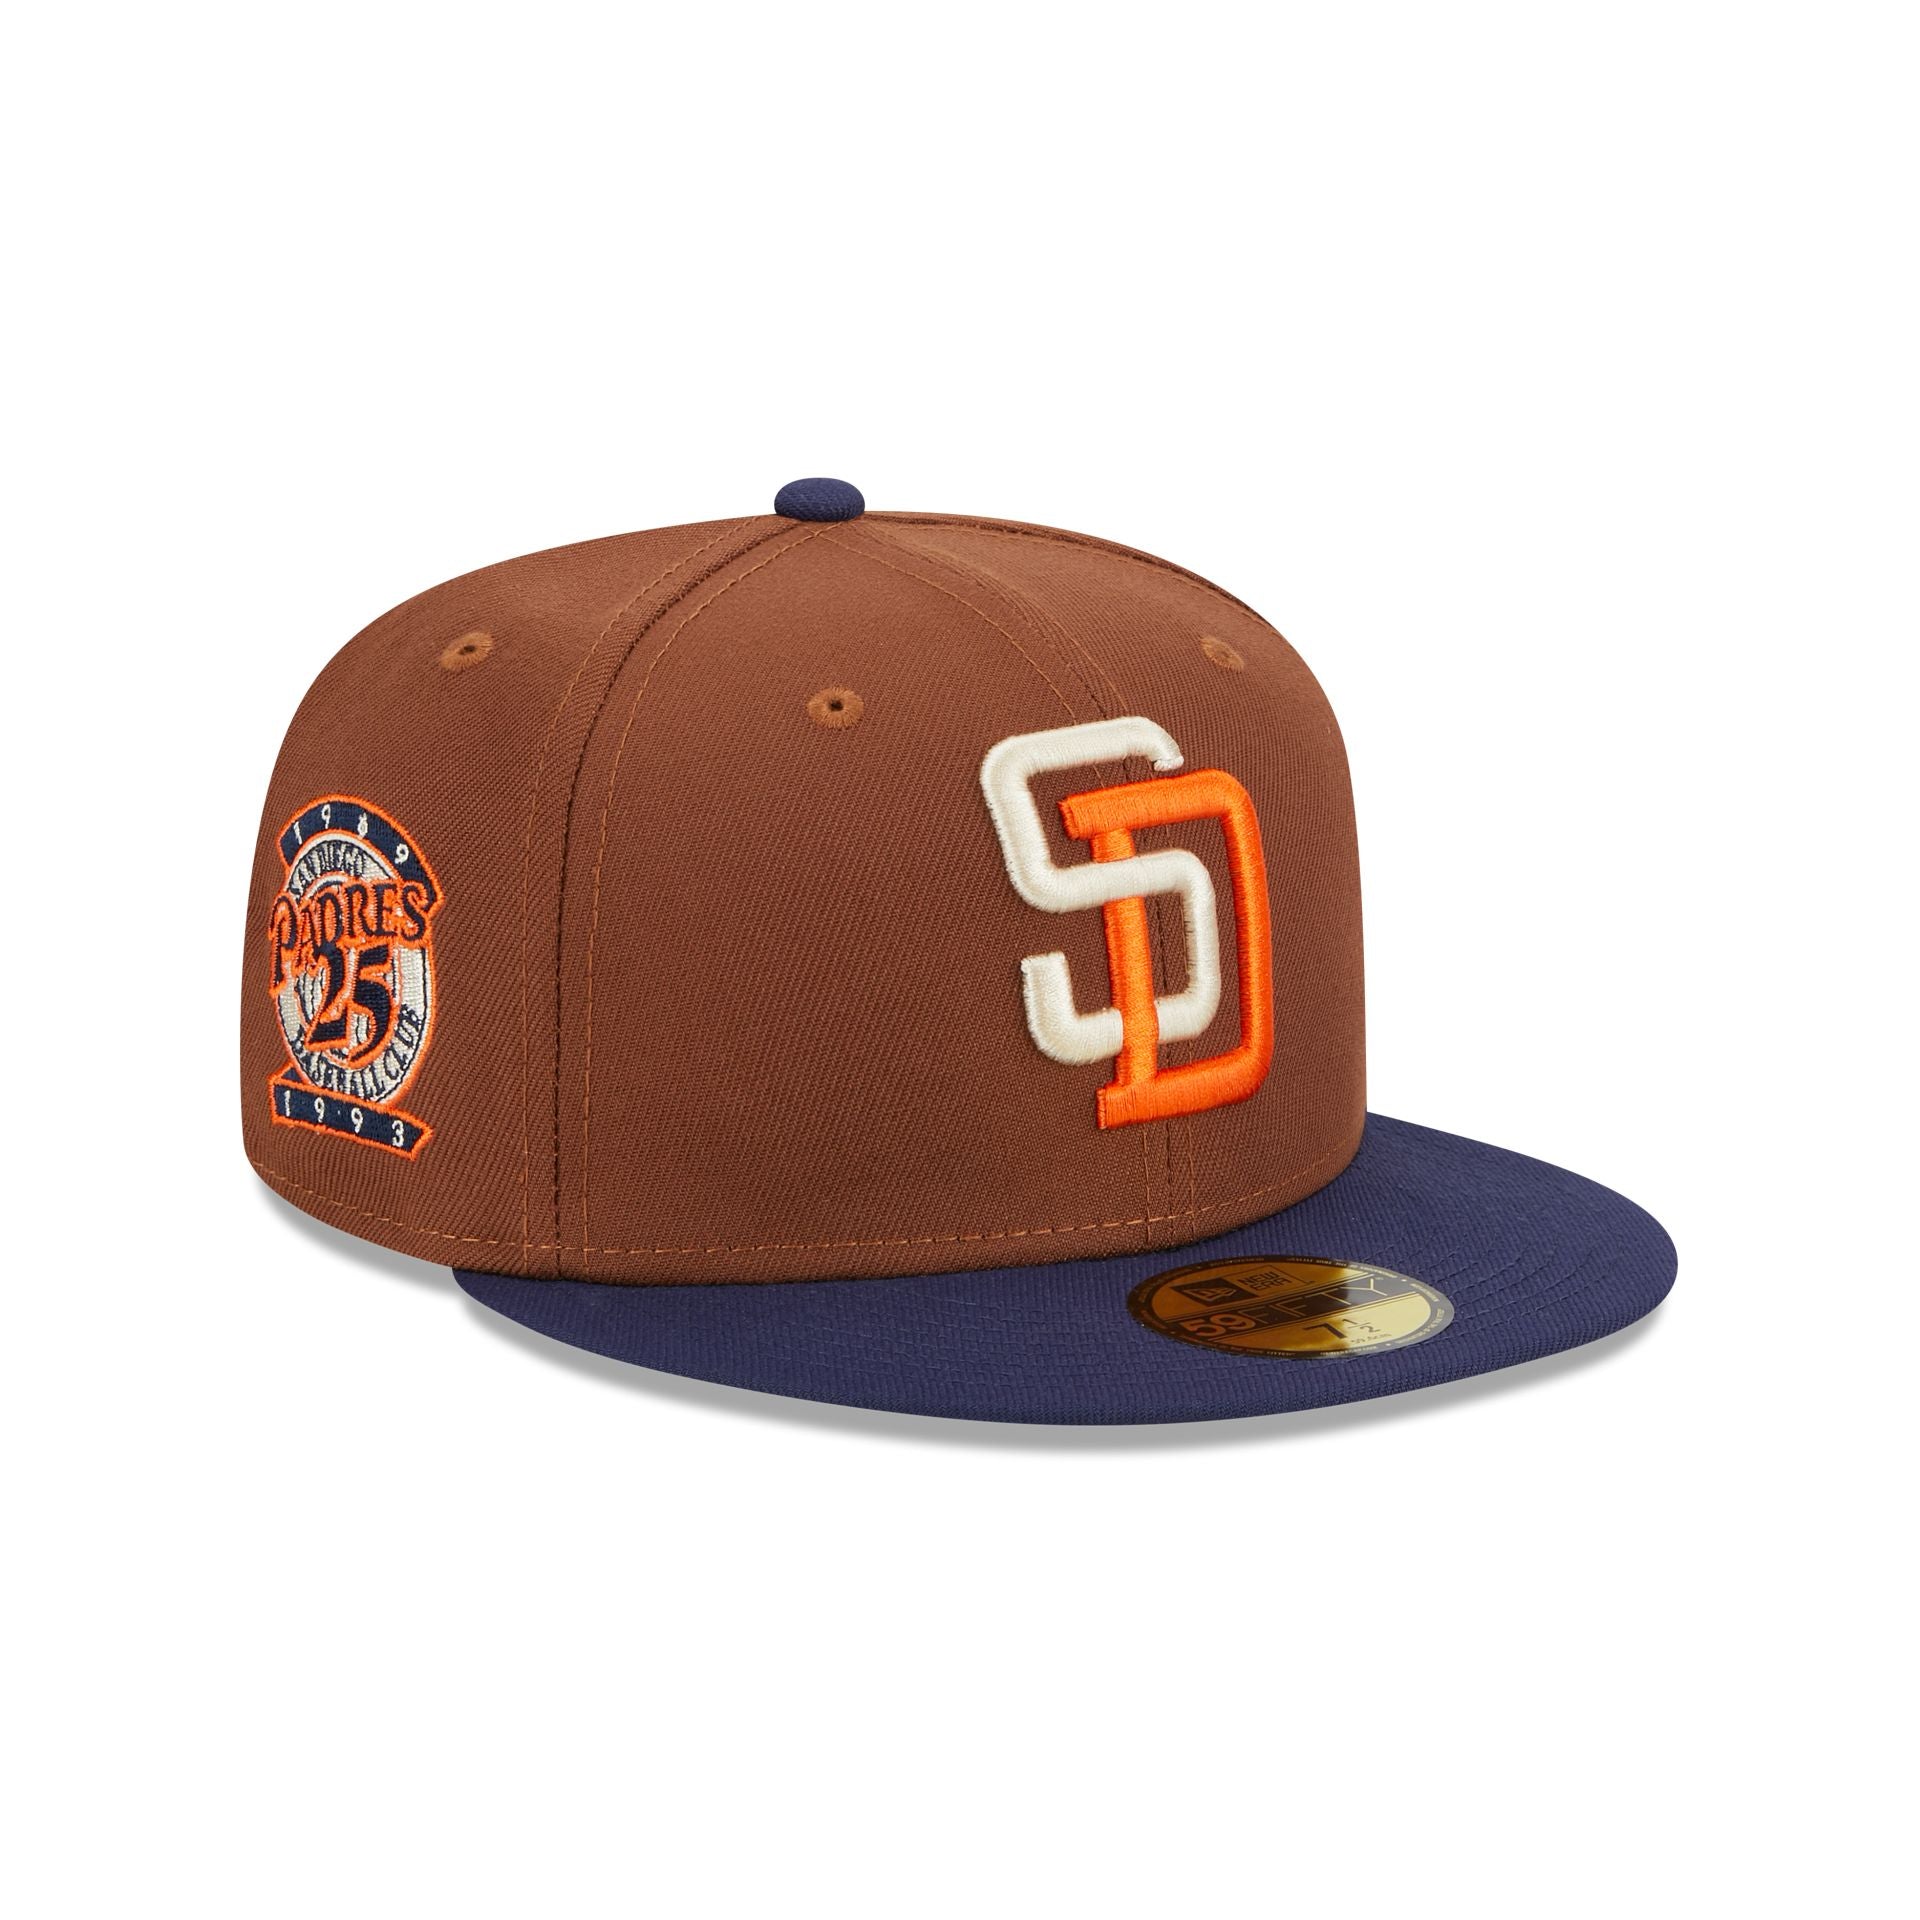 New Era Men's San Diego Padres Brown Low Profile 9Fifty Squared Fitted Hat